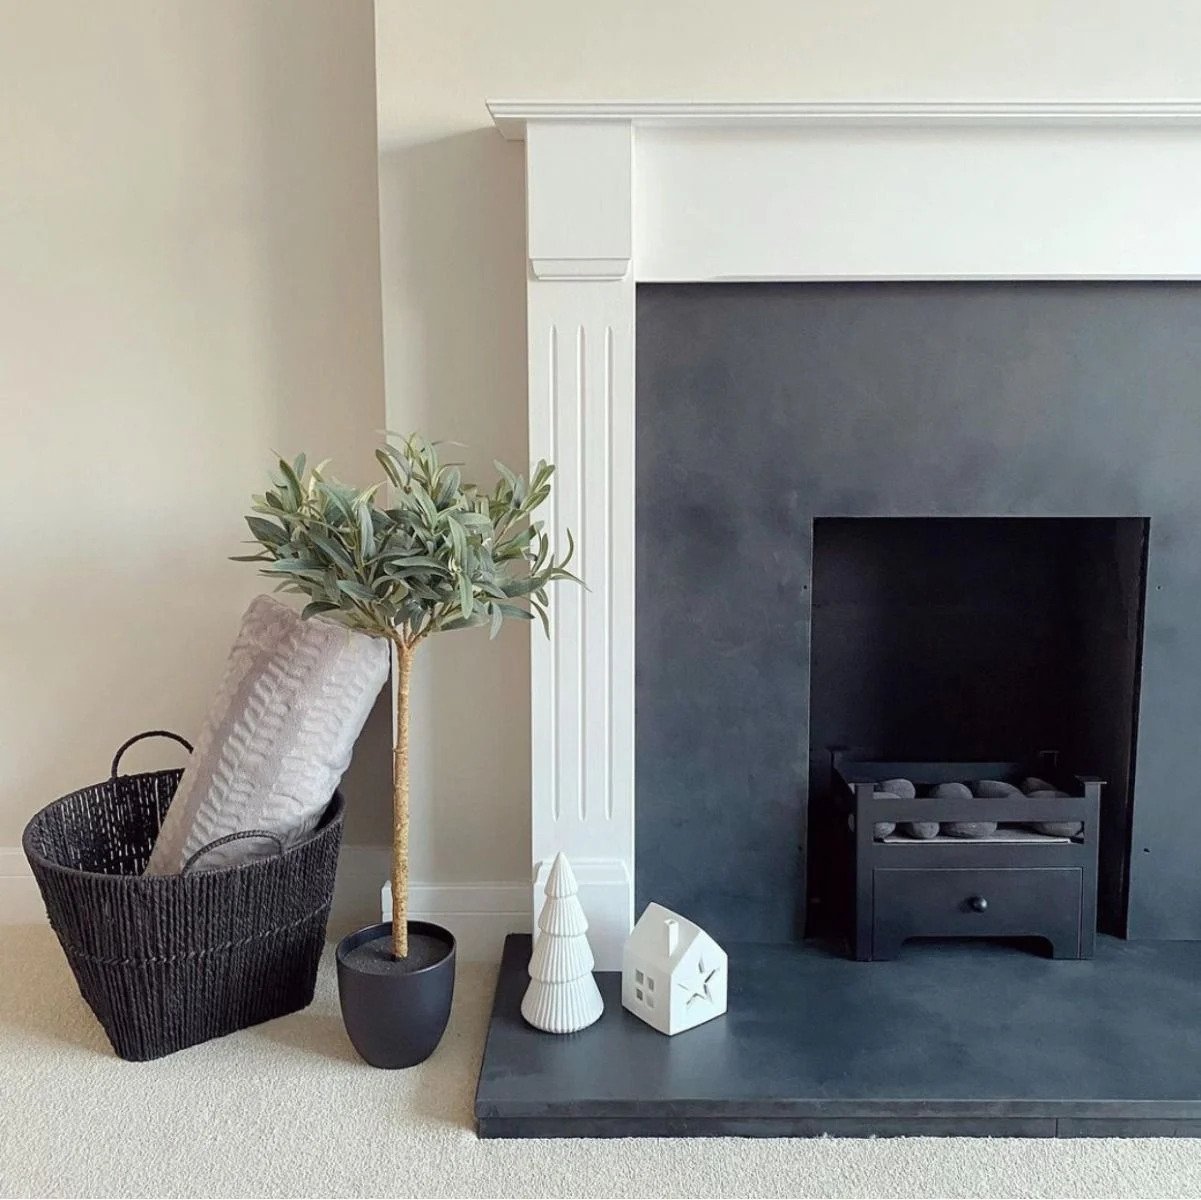 Black bioethanol fireplace insert in a converted fireplace